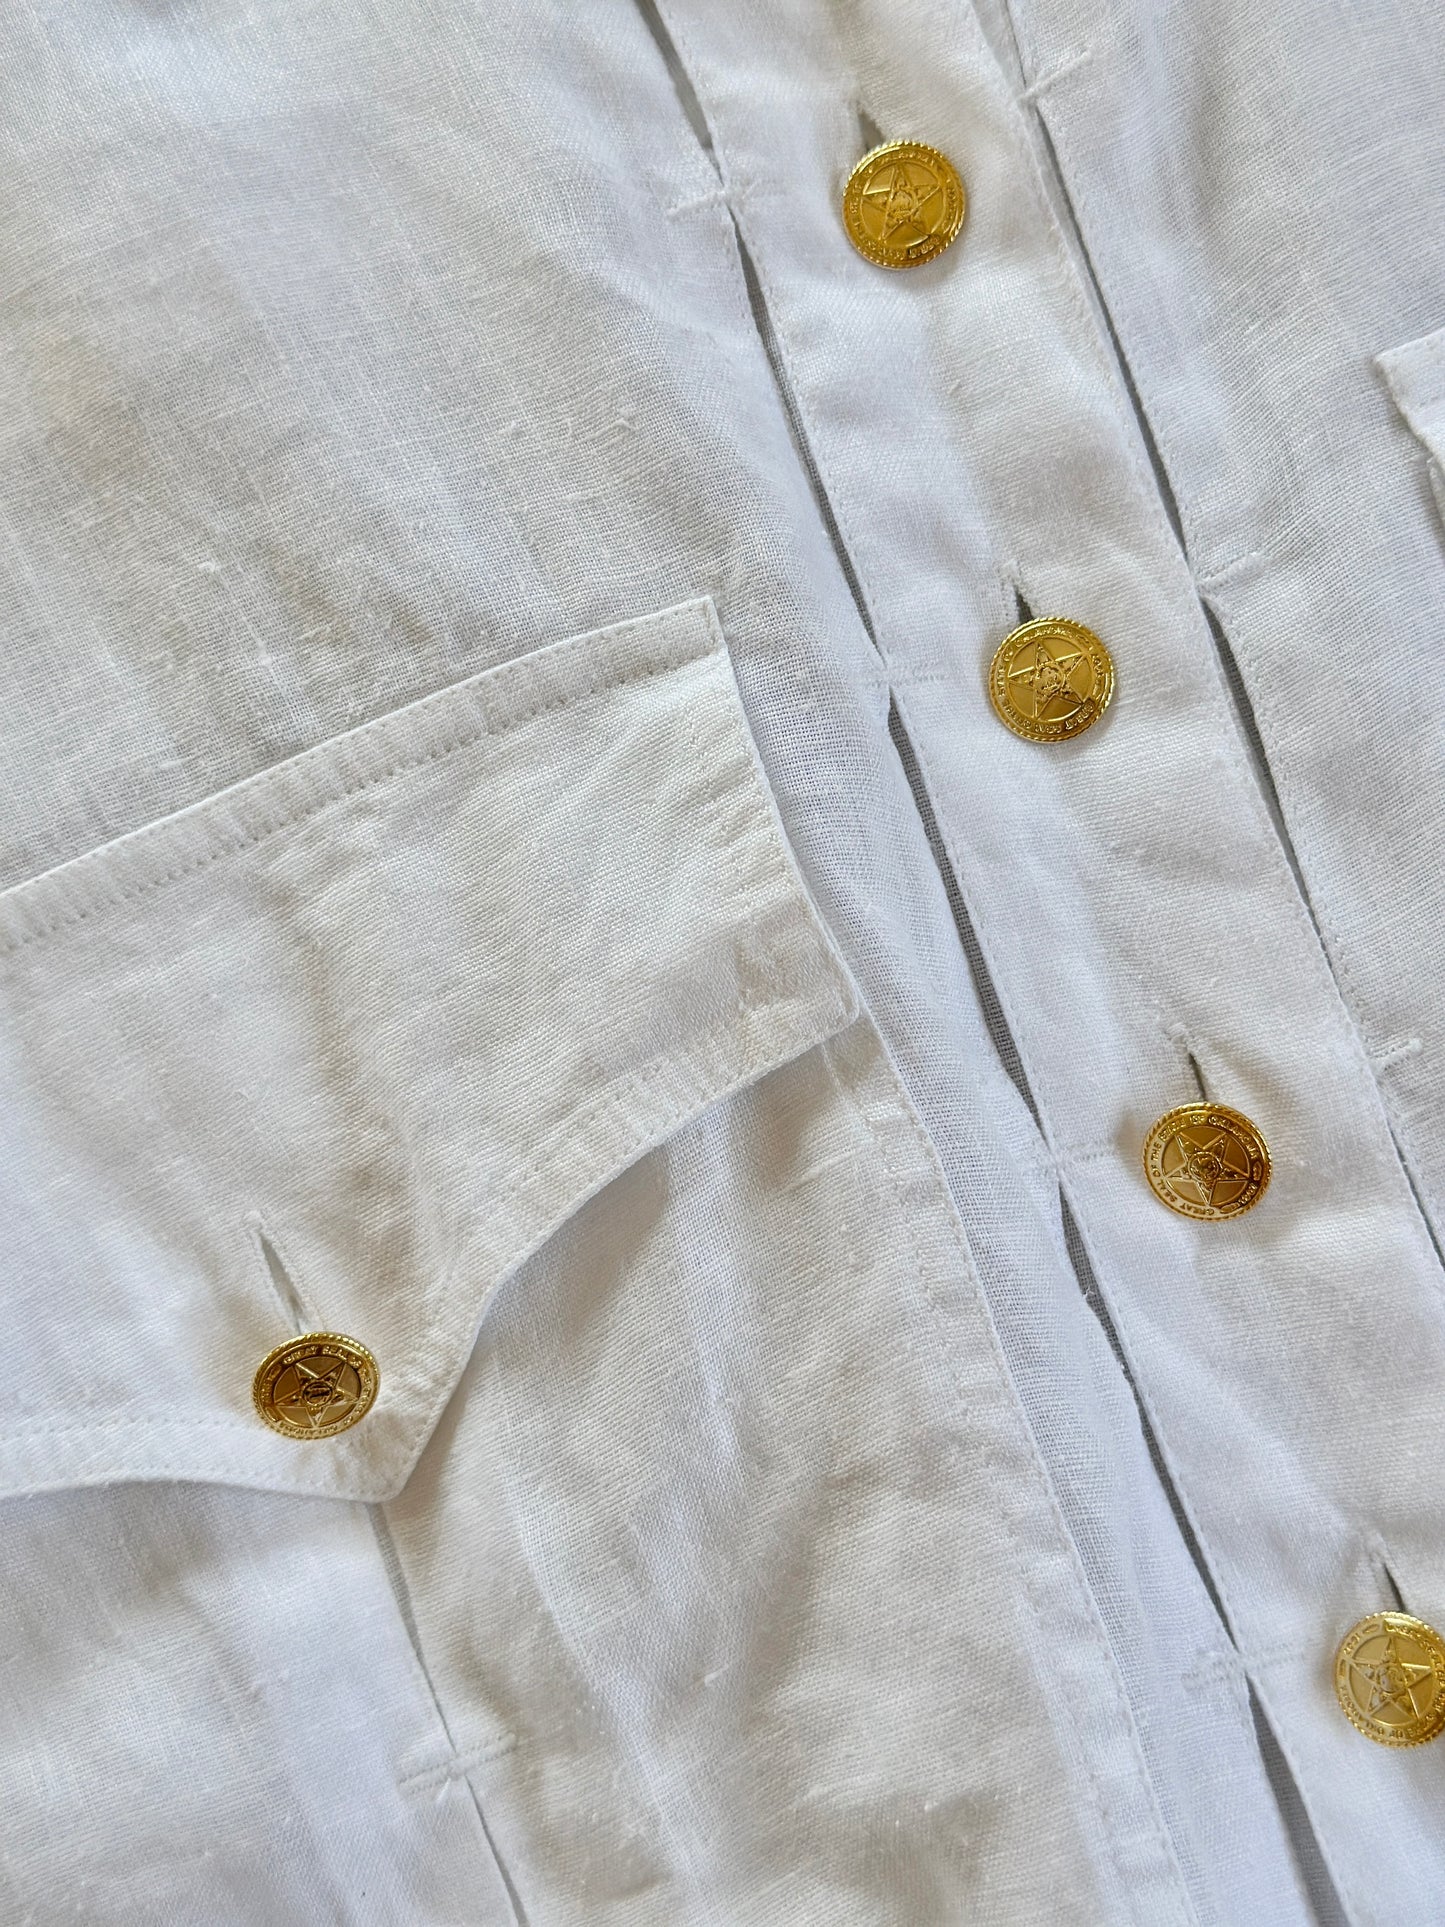 Vintage linen shirt with gold buttons